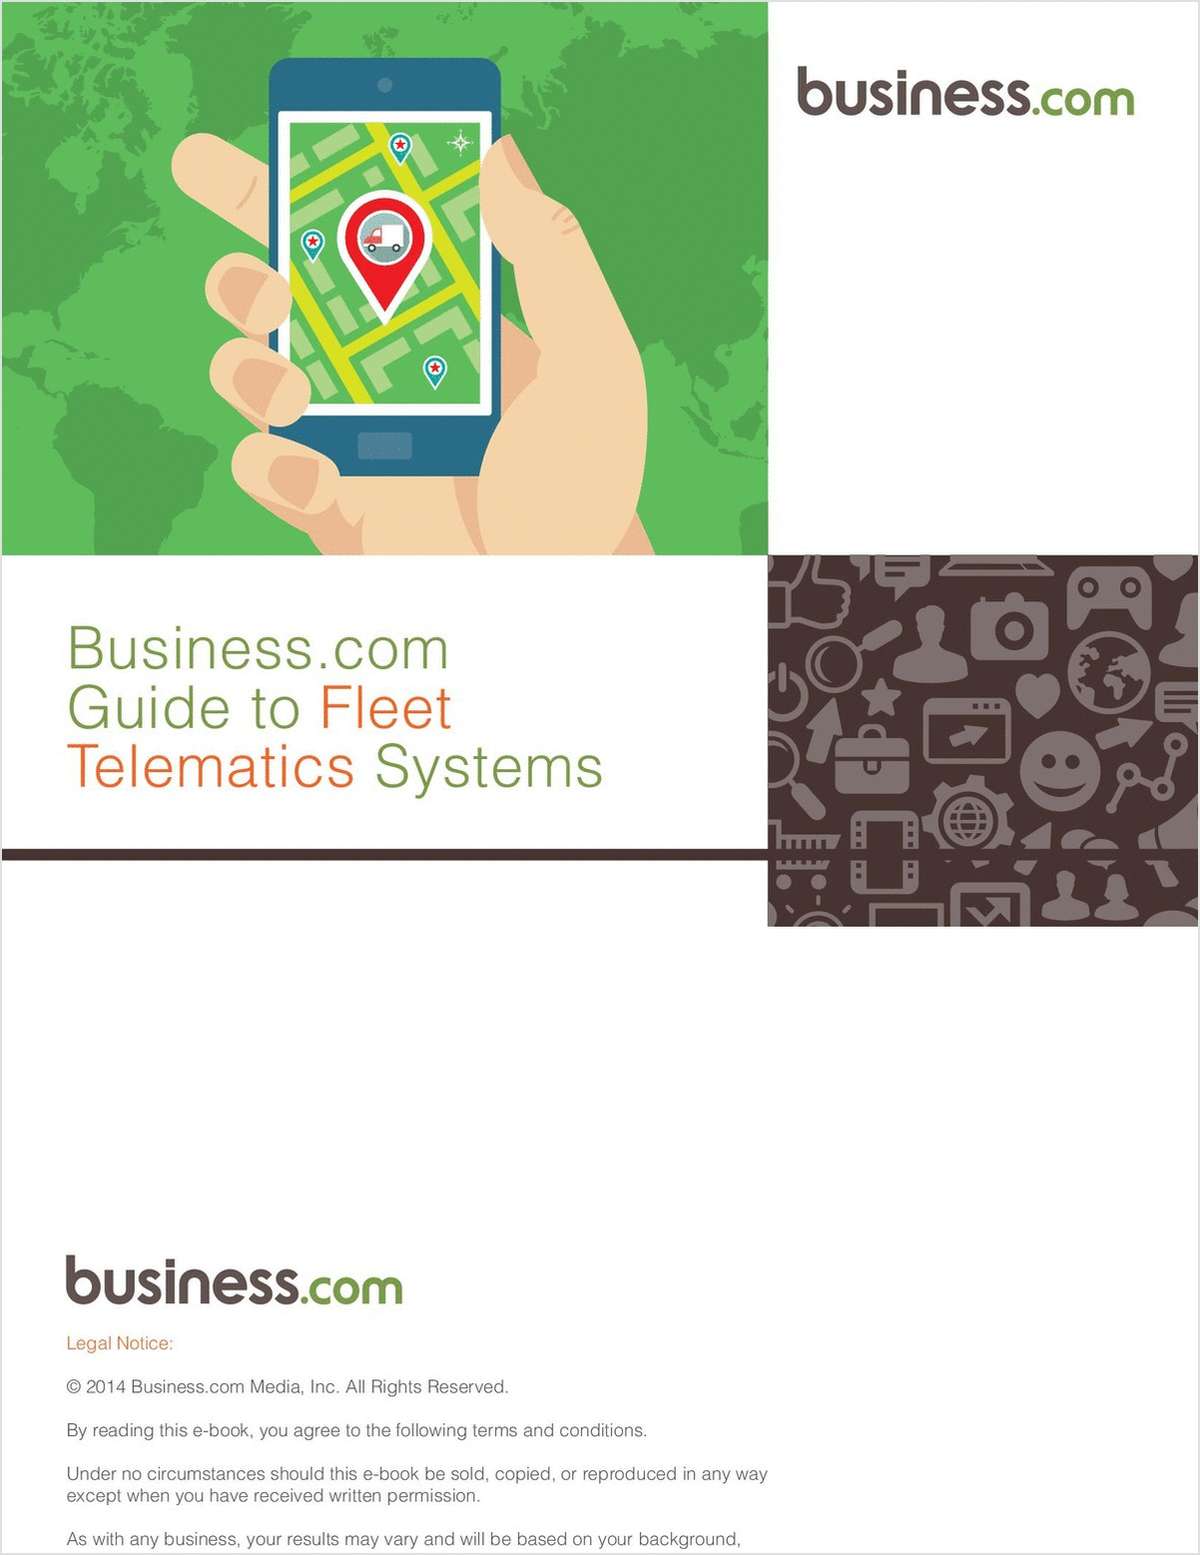 Guide to Fleet Telematics Systems